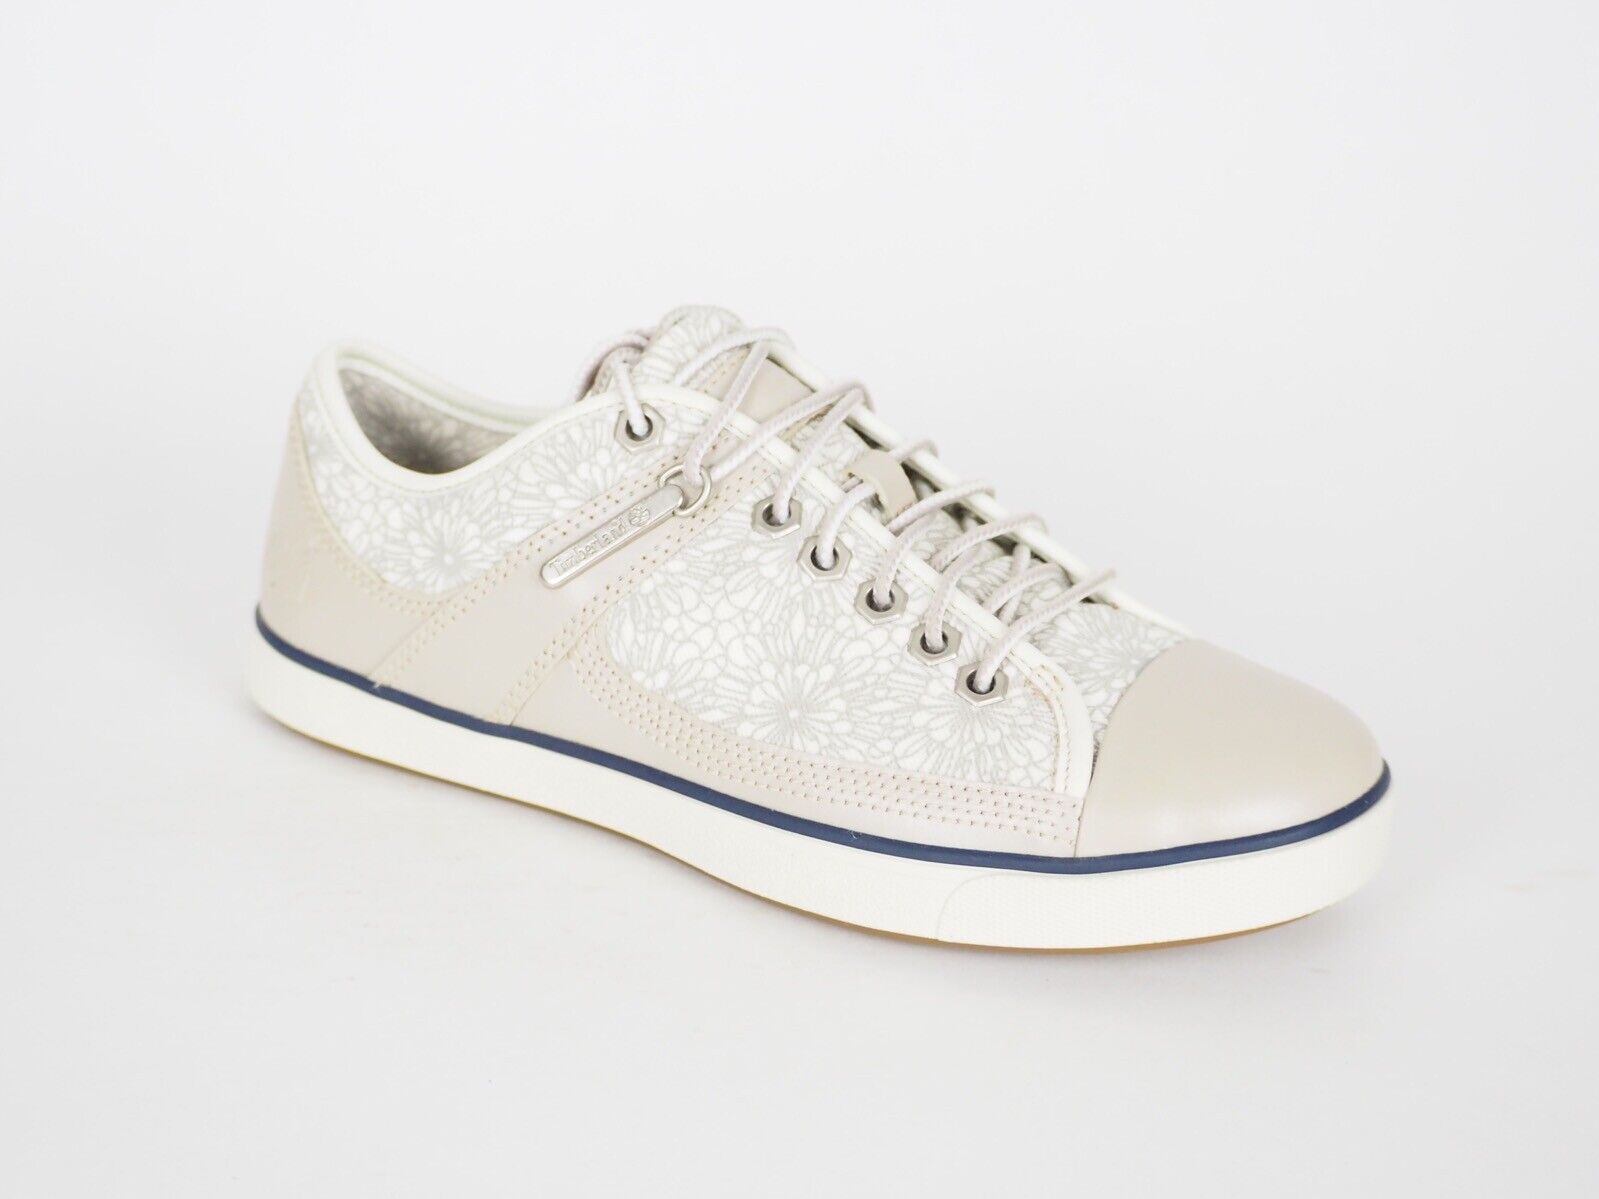 Womens Timberland Deering Oxford 24678 White Taupe Leather Lace Up Trainers - London Top Style